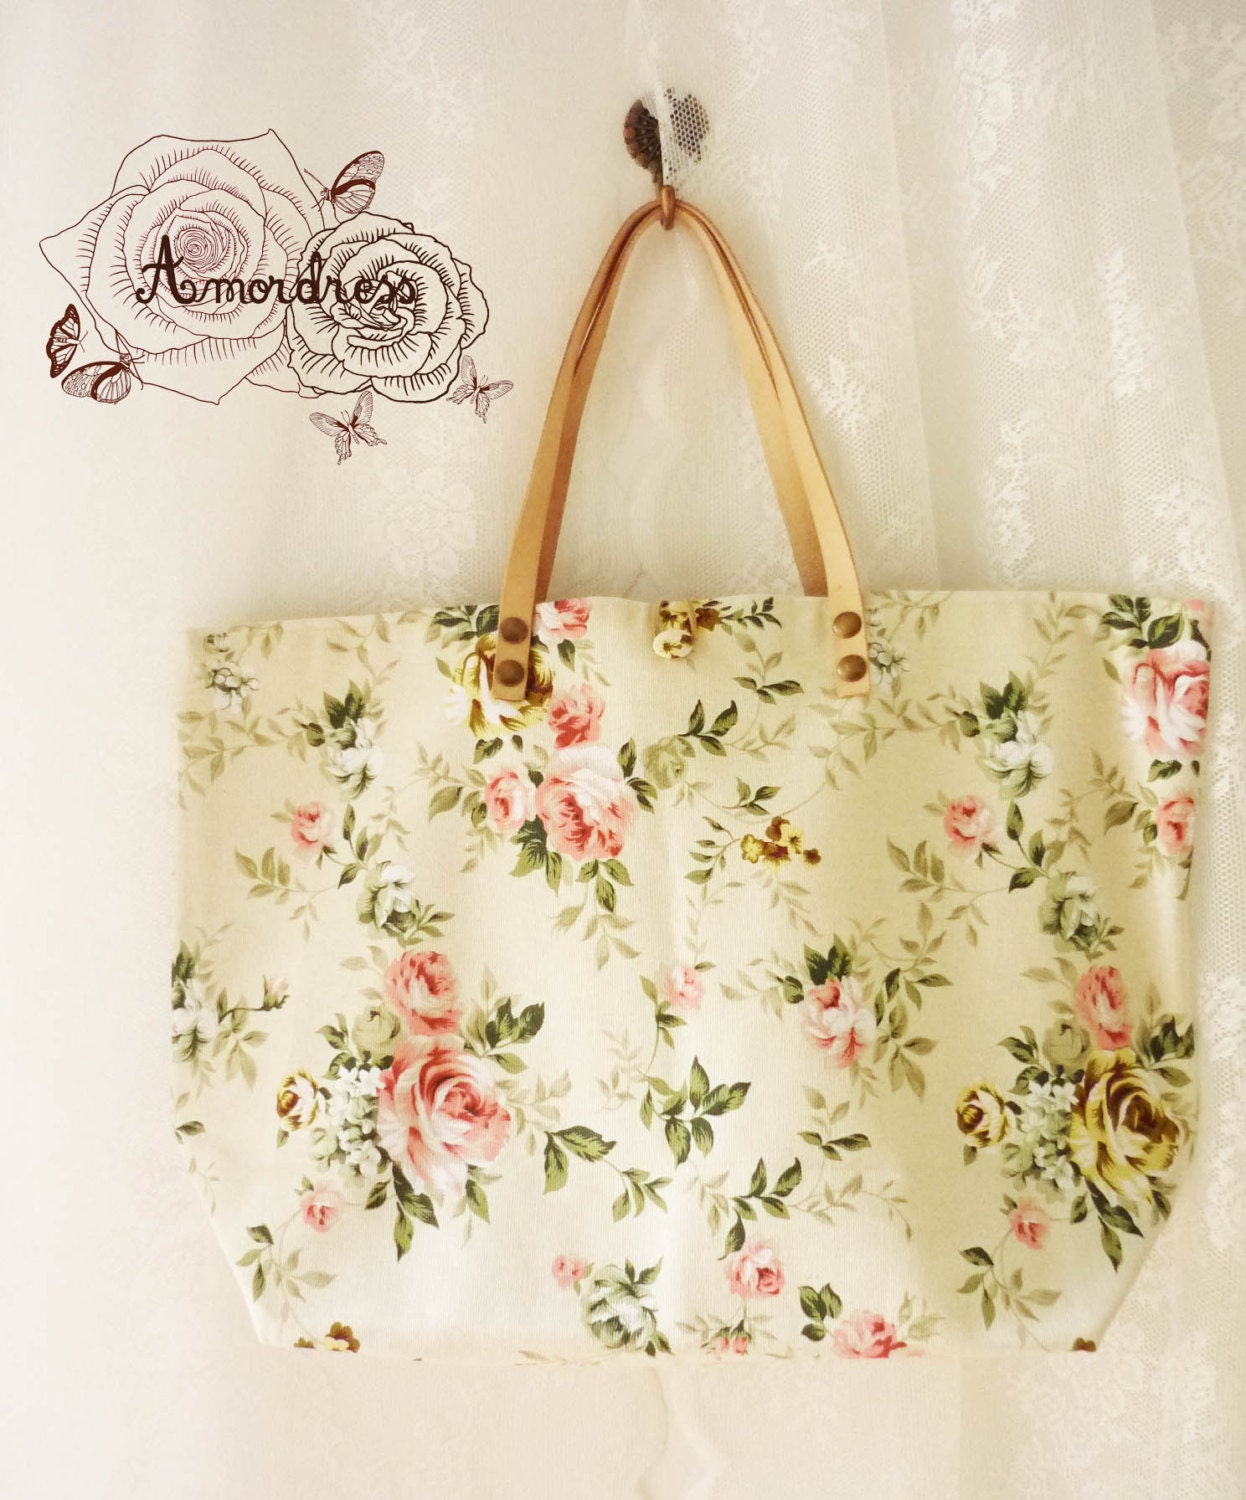 Floral Tote Bag Printed Canvas Bag Genuine Leather by Amordress